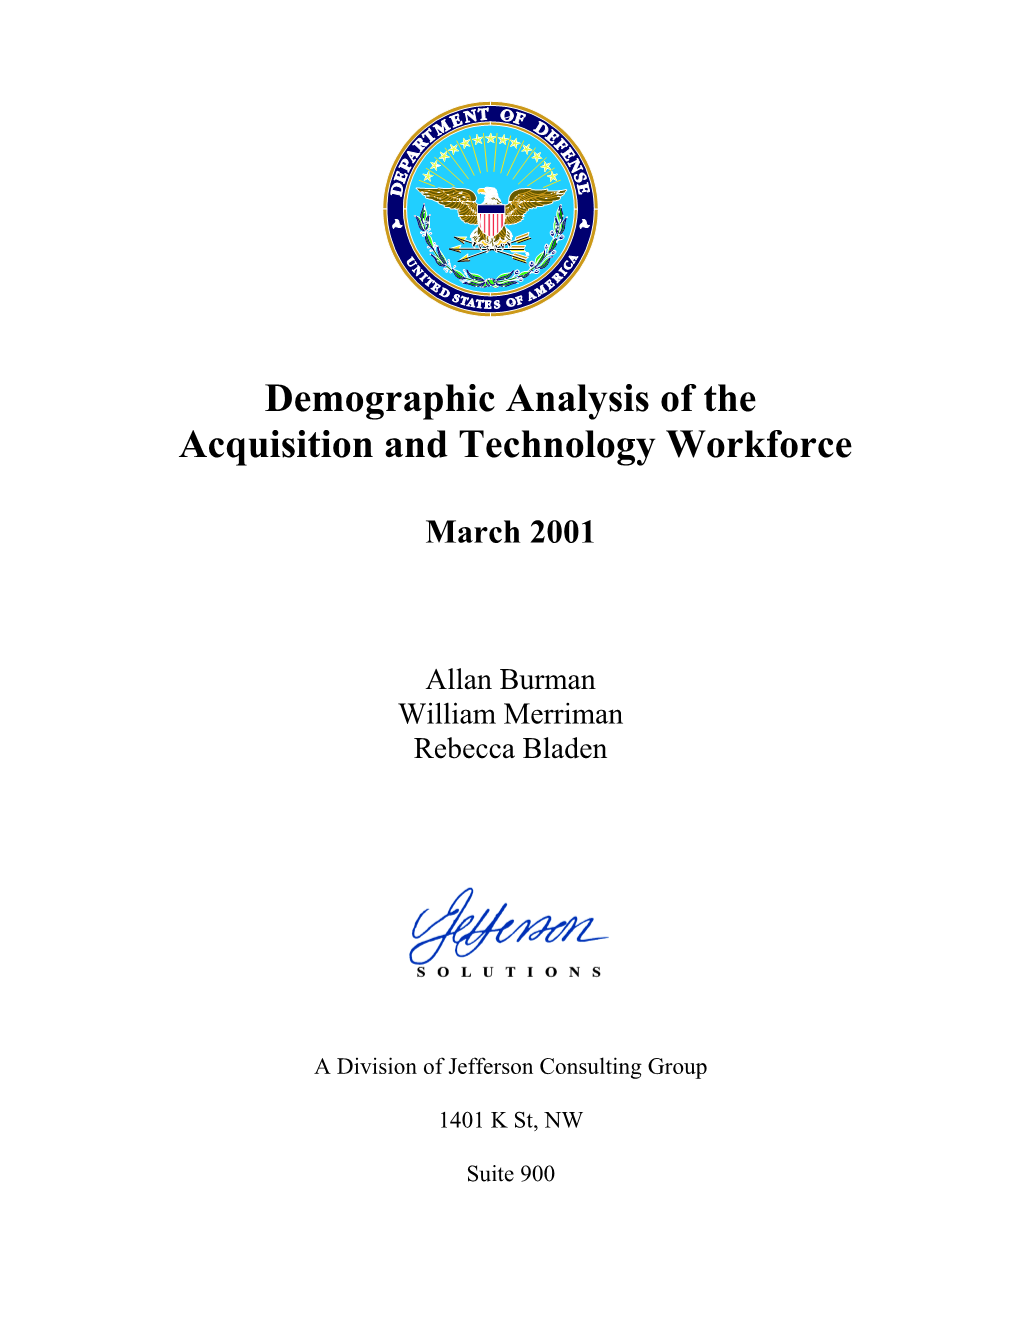 Acquisition and Technology Workforce